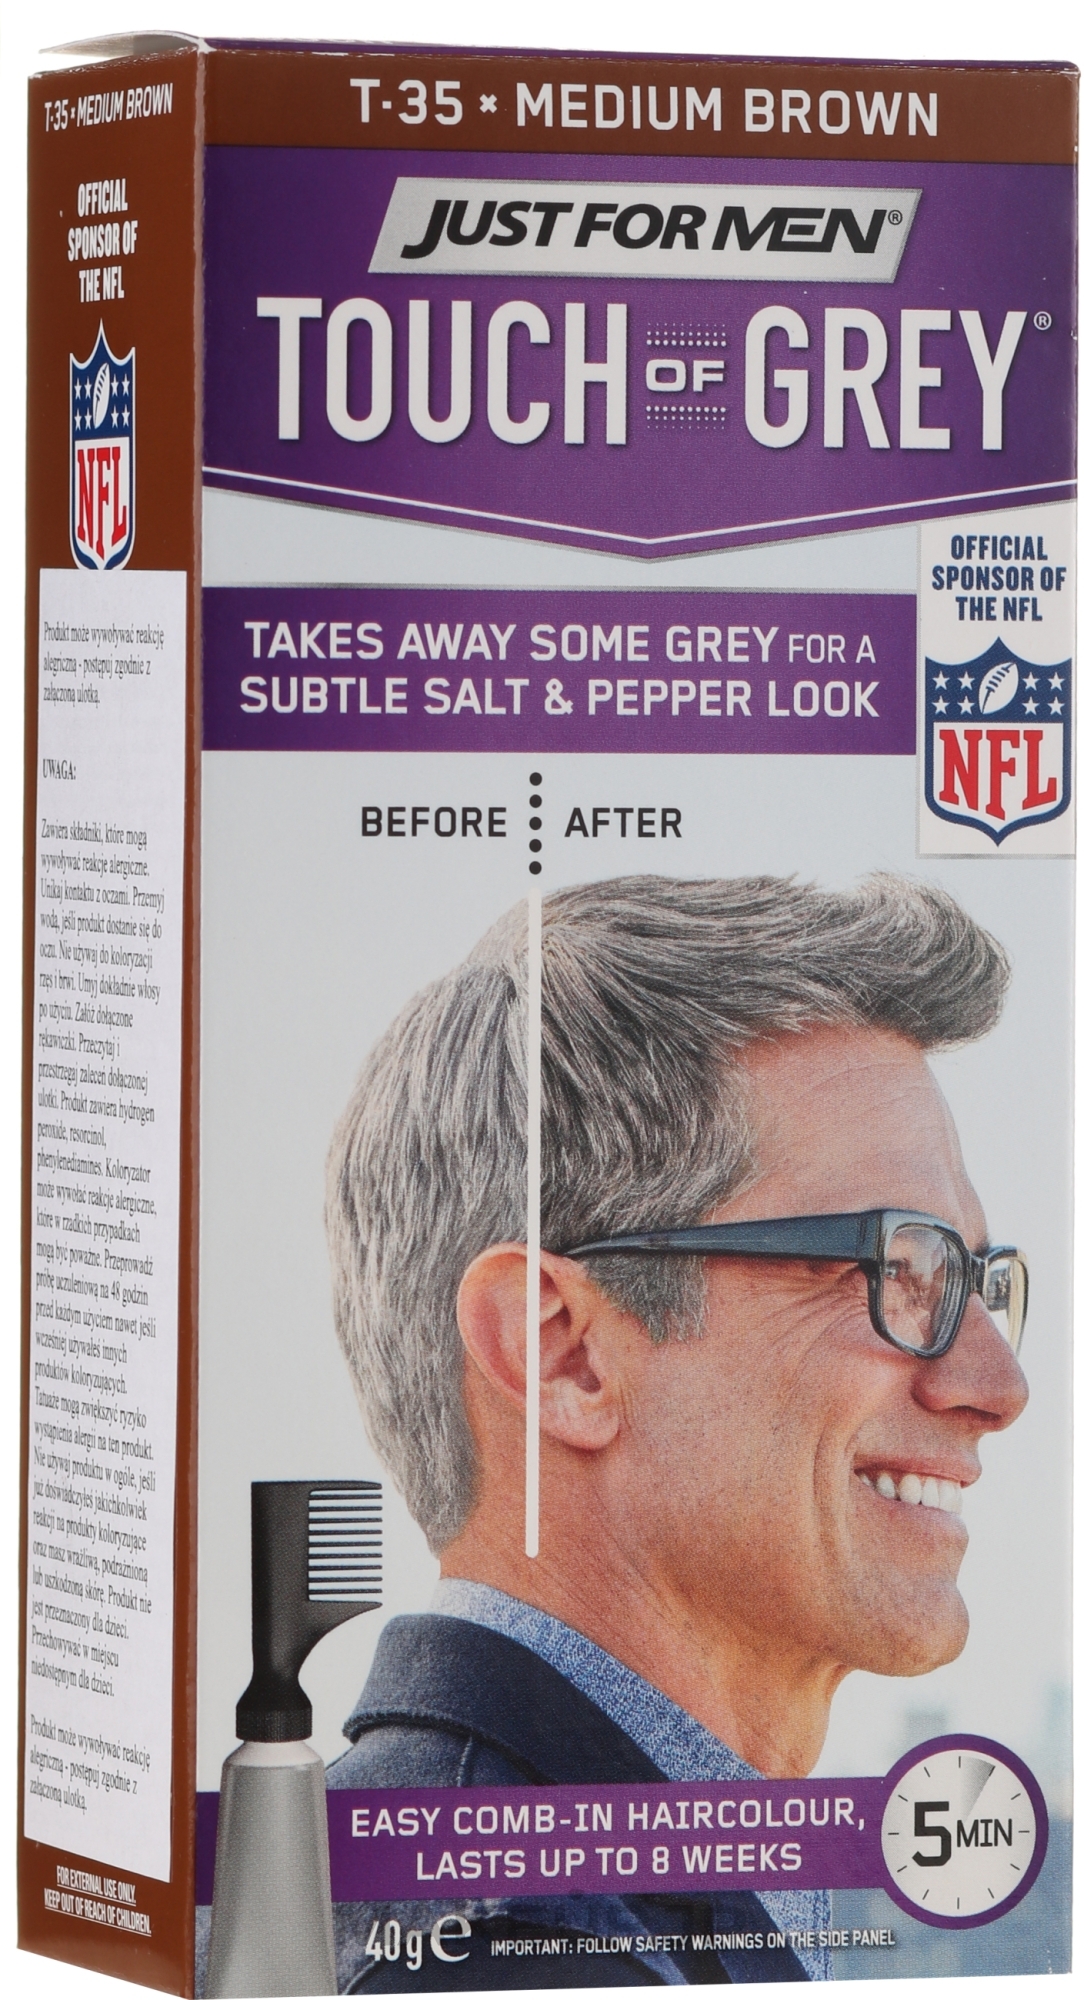 Men Gray Coverage Hair Color - Just For Men Touch Of Gray — photo T-35 - Medium Brown